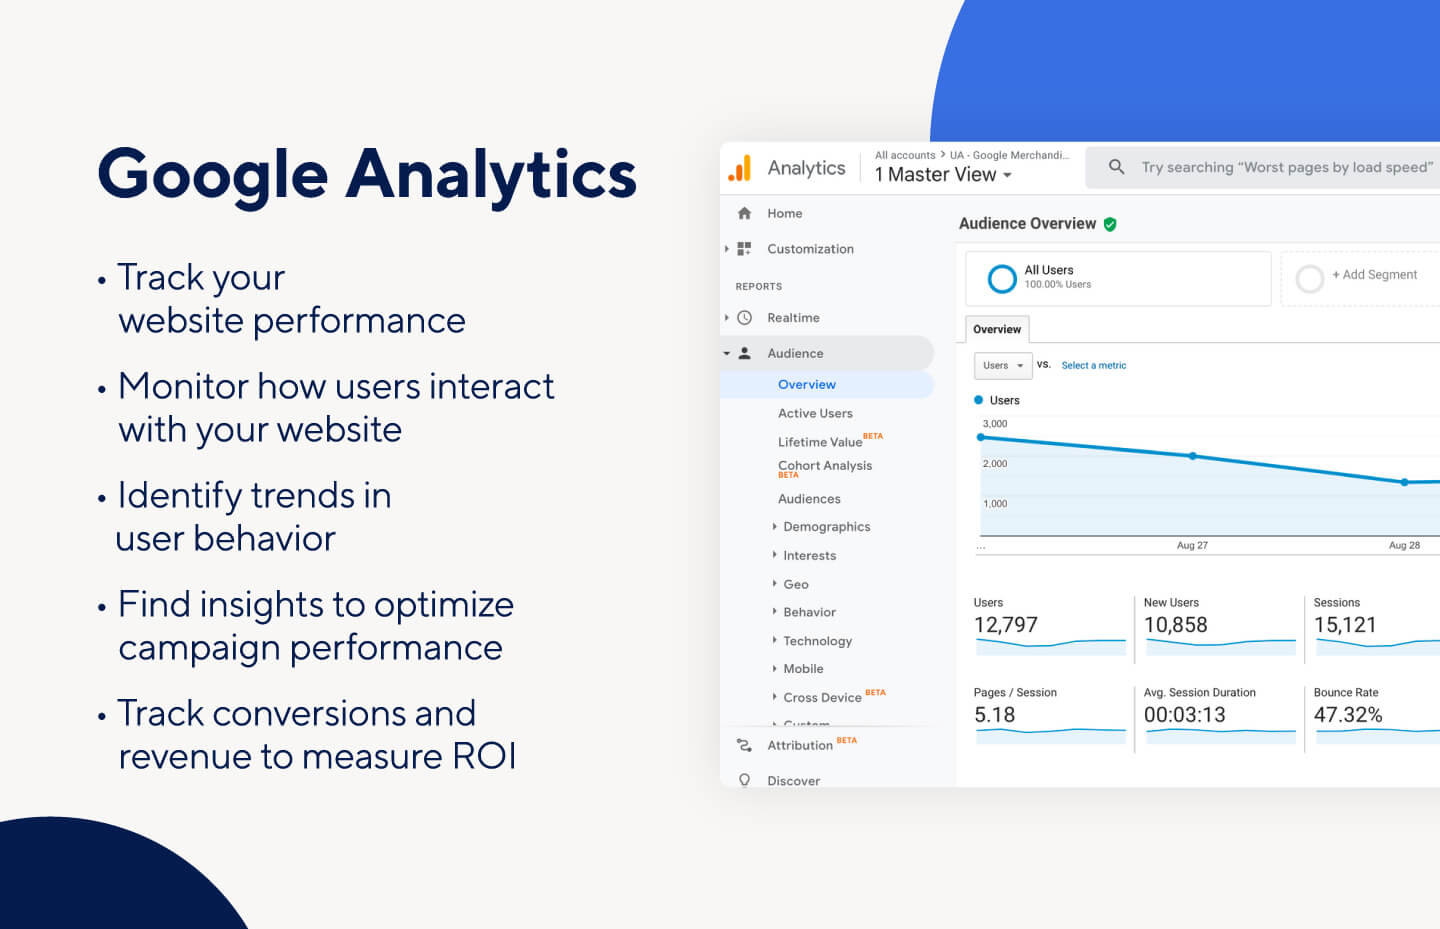 Benefits offered by Google analytics as a digital marketing tool like conversion tracking.